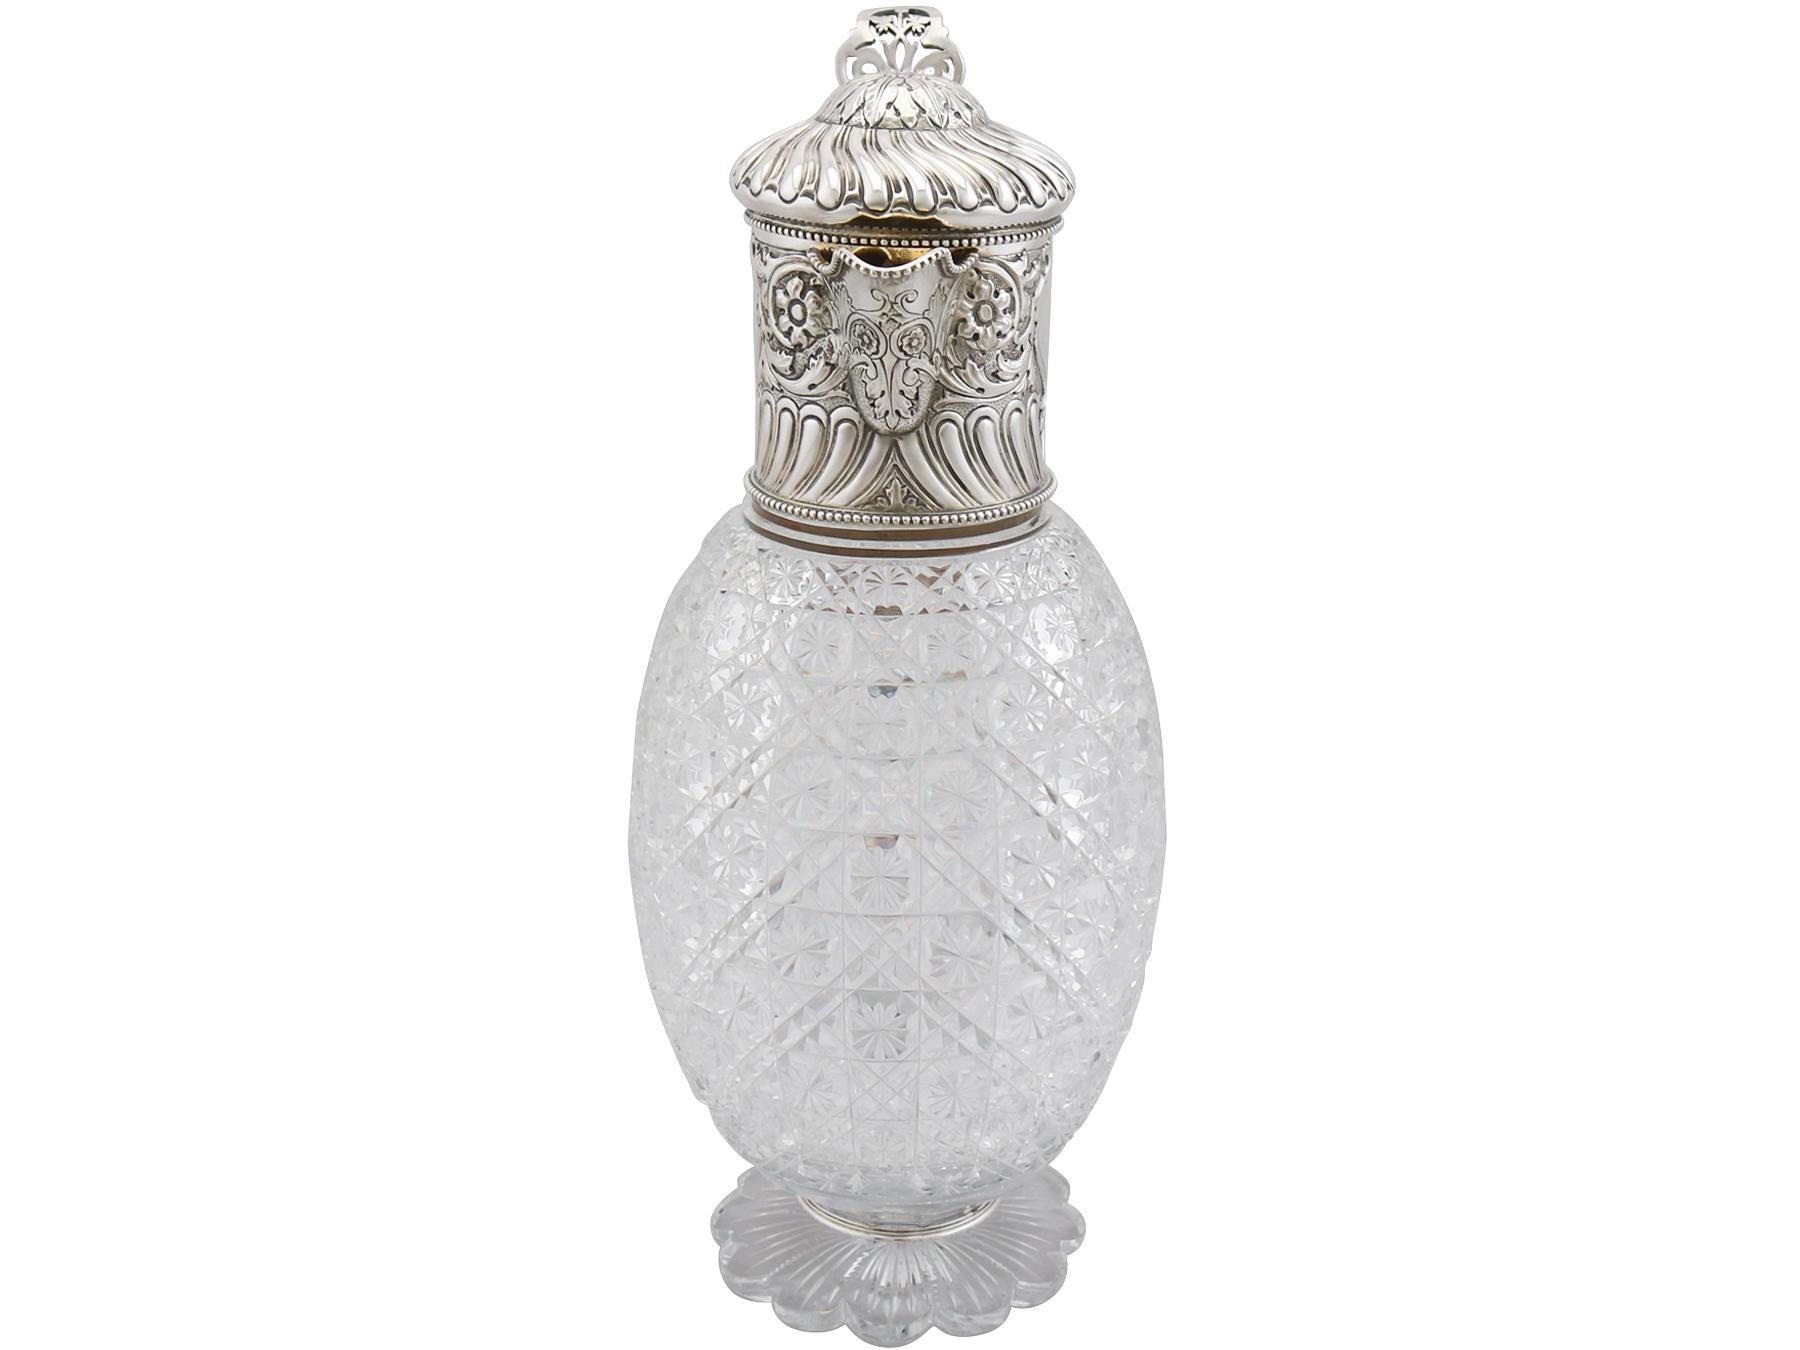 British Antique Victorian Cut Glass and Sterling Silver Mounted Claret Jug, 1887